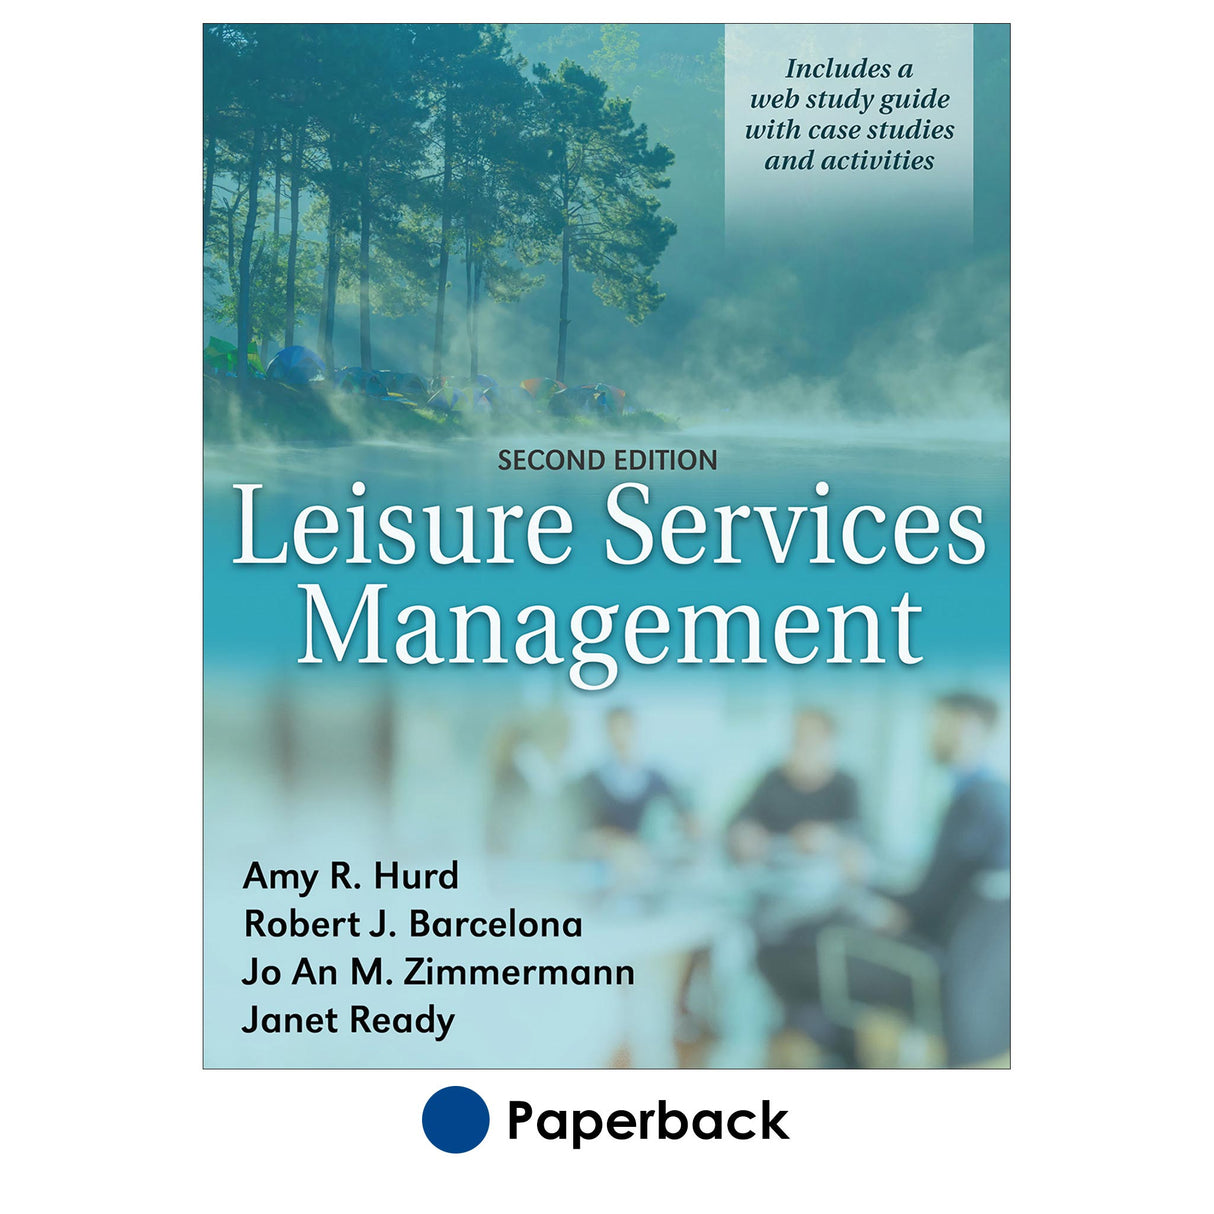 Leisure Services Management 2nd Edition With Web Study Guide